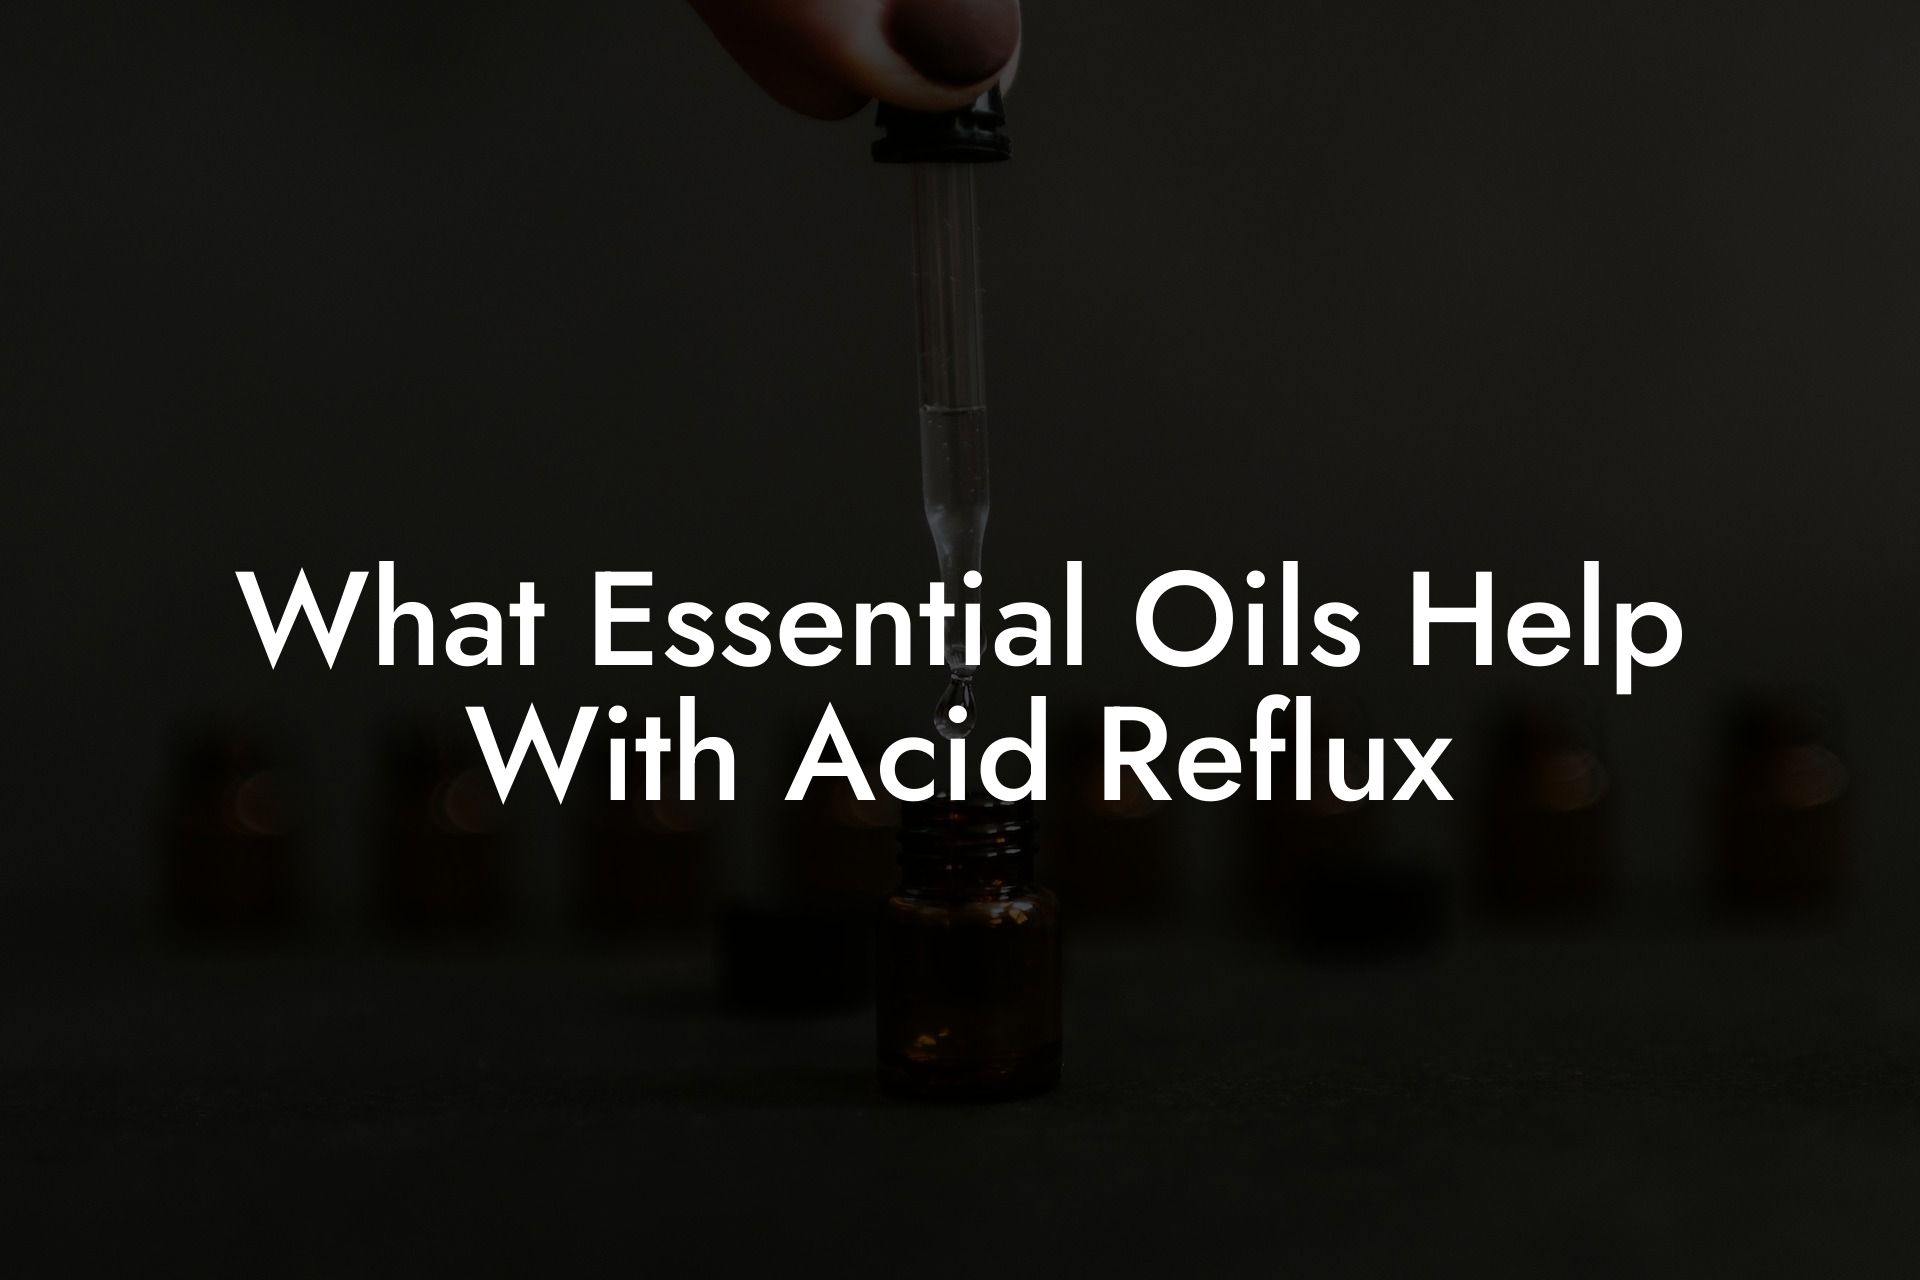 What Essential Oils Help With Acid Reflux